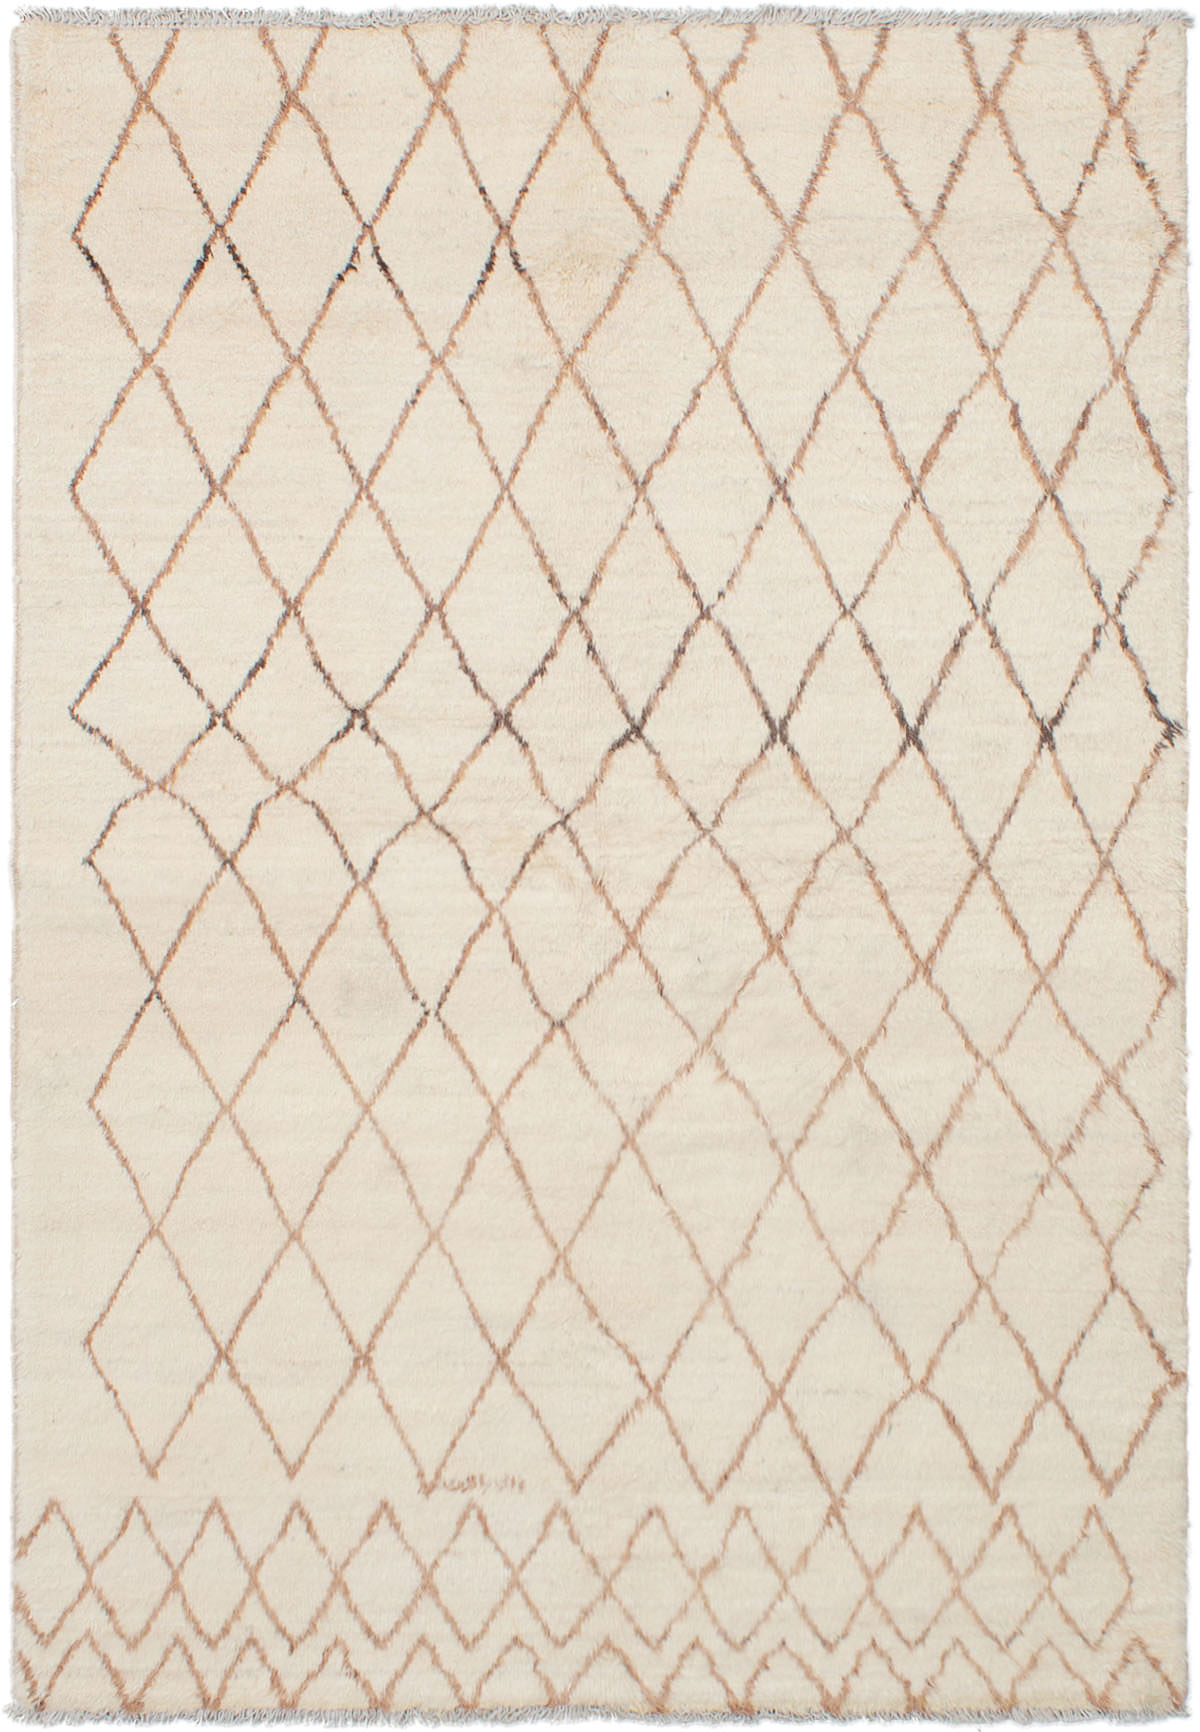 Hand-knotted Tangier Cream Wool Rug 6'1" x 9'0" Size: 6'1" x 9'0"  